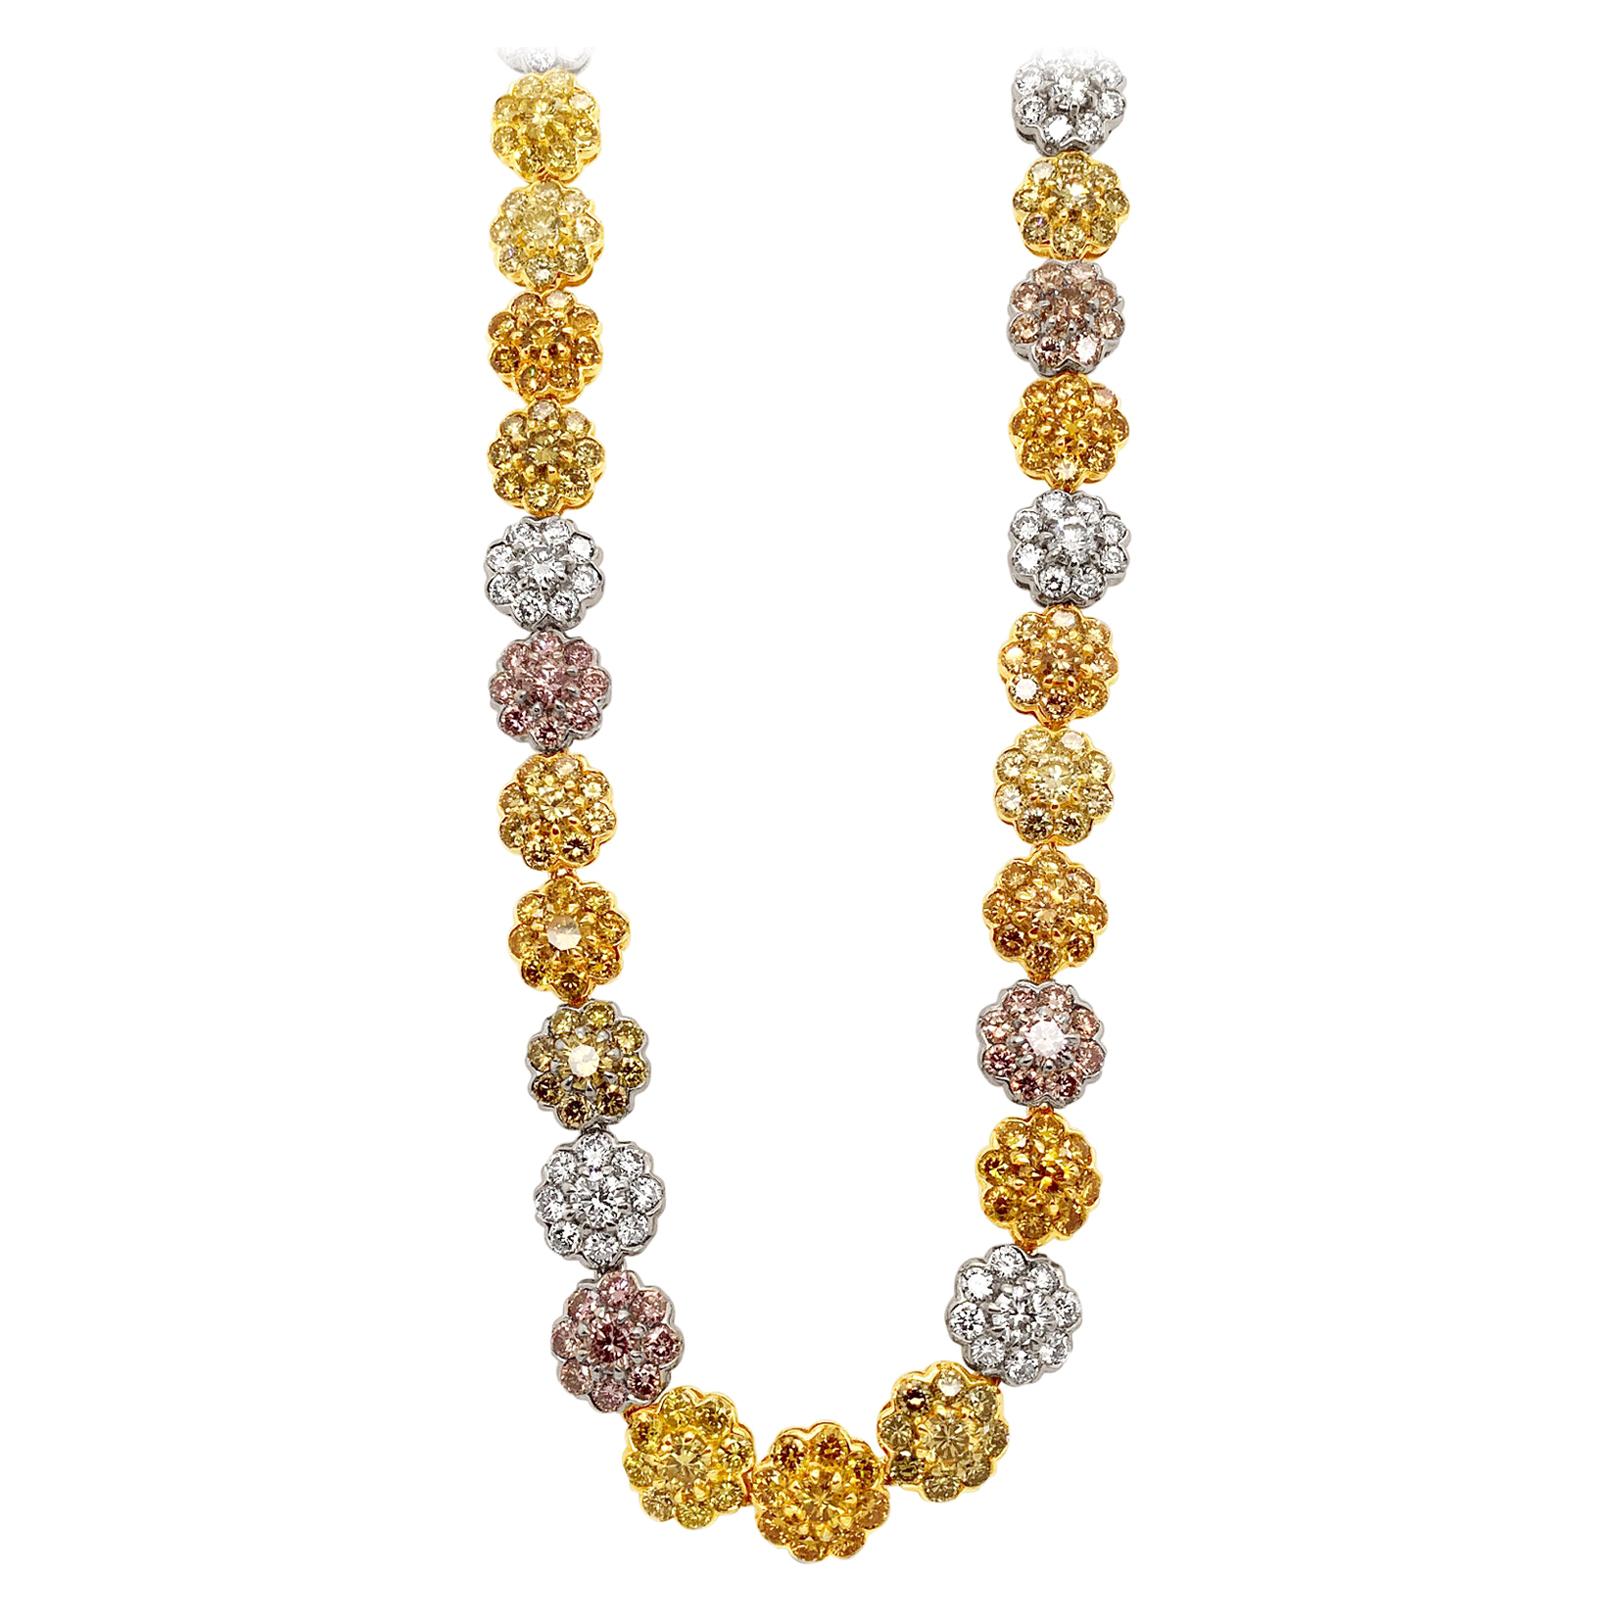 25.24 Carat 'Total Weight' Natural Color Diamond Necklace in Platinum & 18k Gold